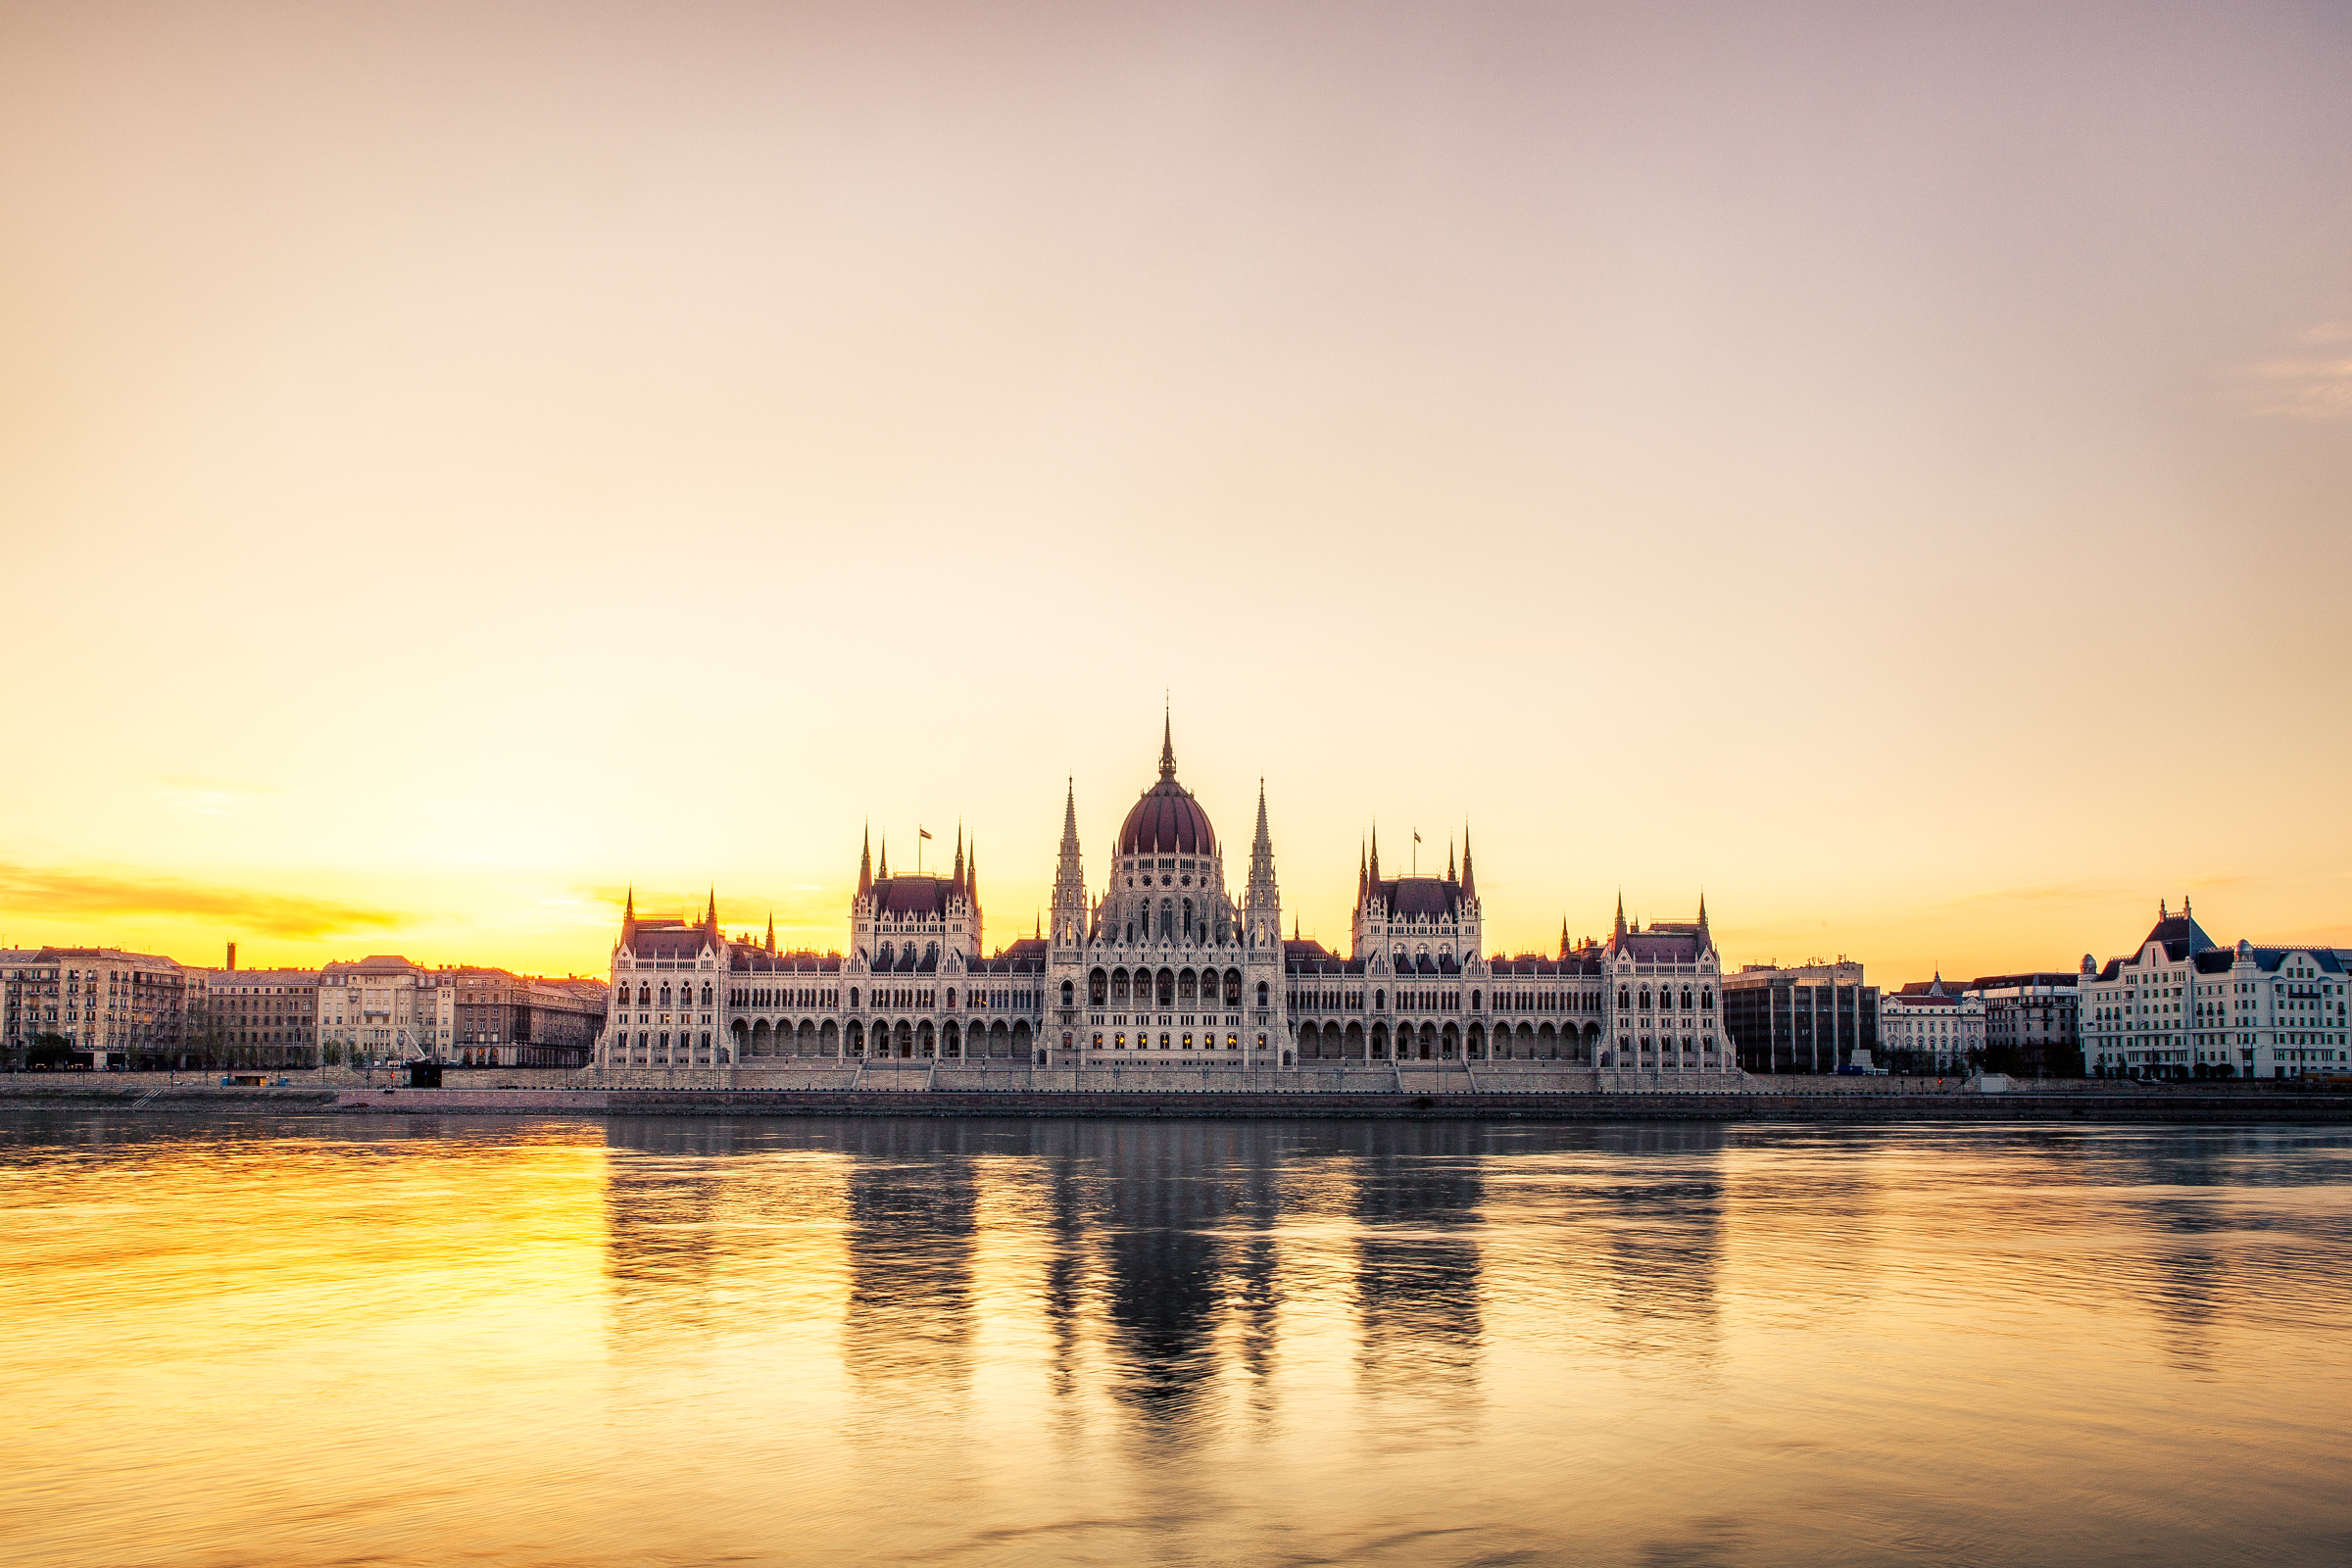 Man Made Hungarian Parliament Building HD Wallpaper | Background Image